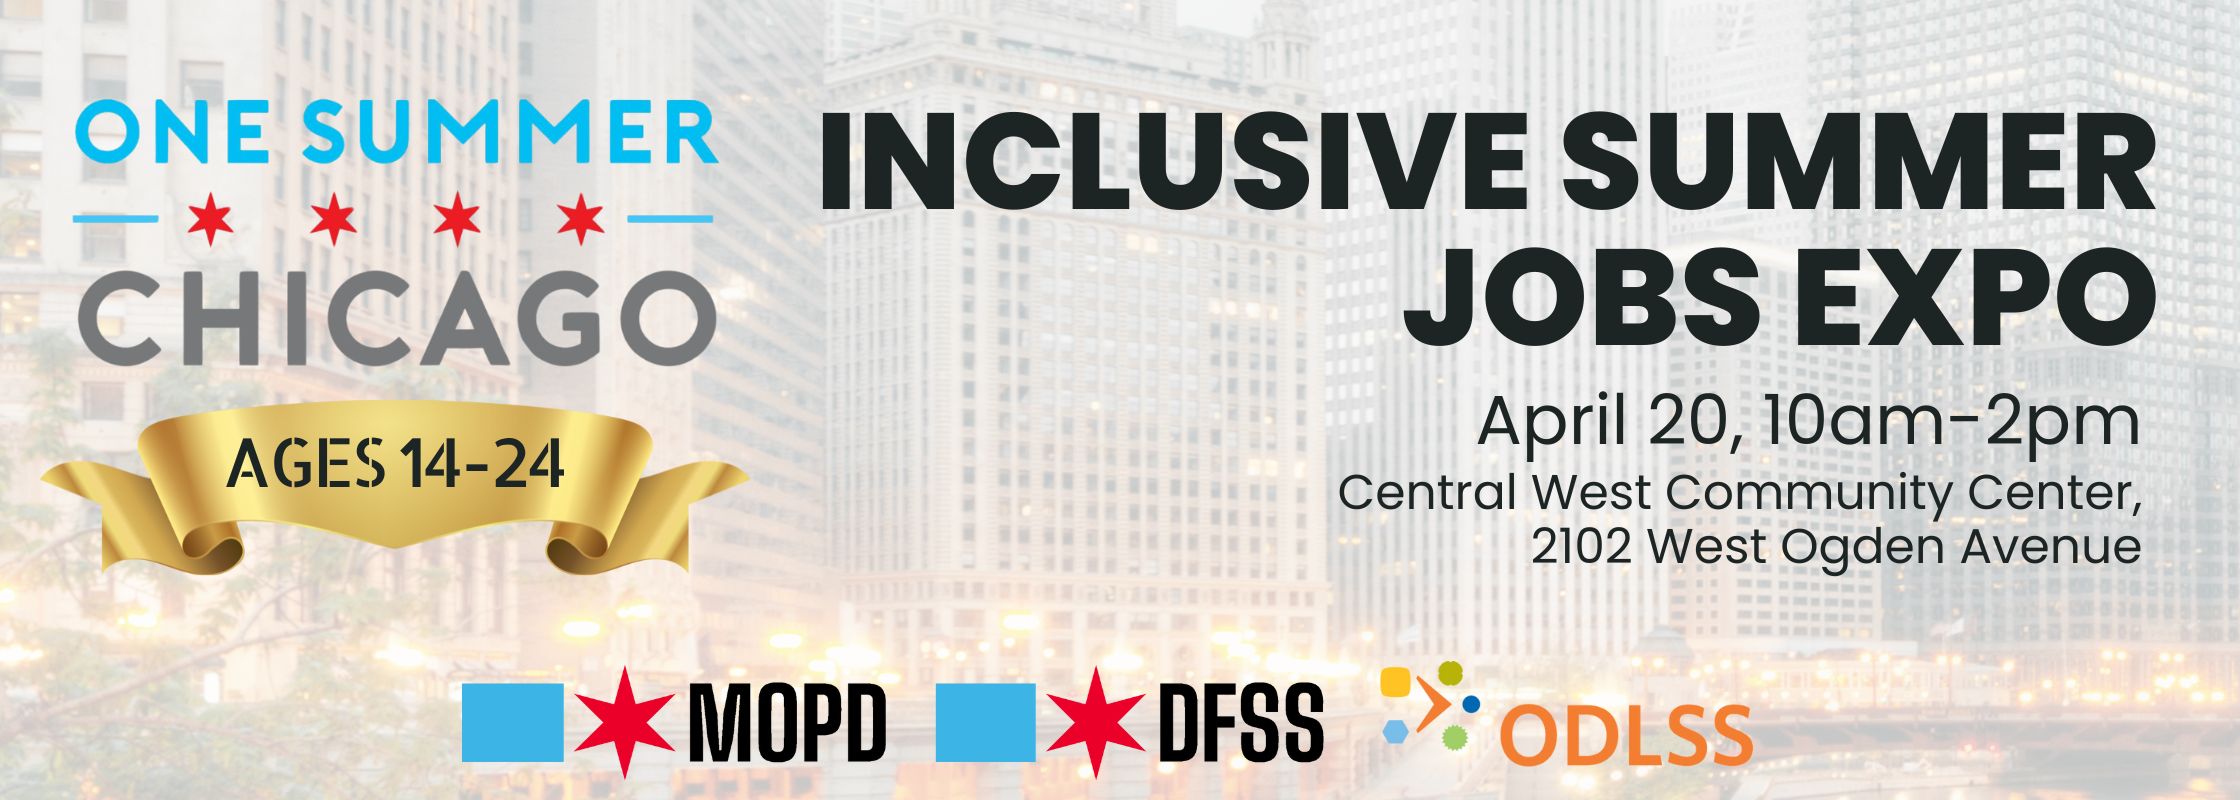 The One Summer Chicago Inclusive Summer Jobs Expo will be held on Saturday, April 20, 2024 from 10am-2pm at Central West Community Center.